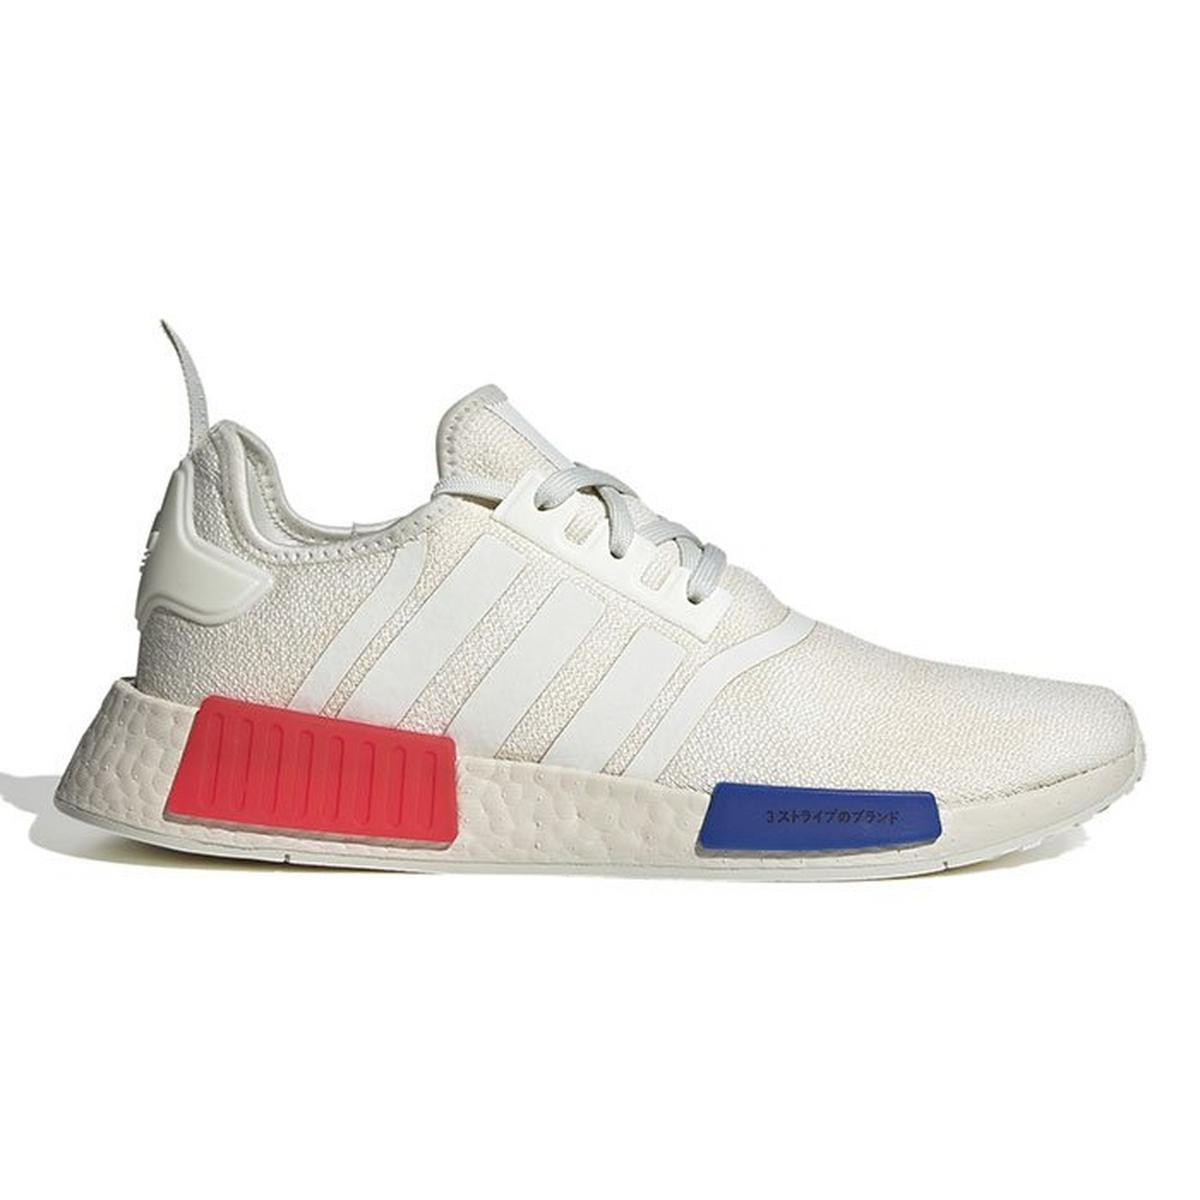 Chaussures NMD_R1 pour hommes